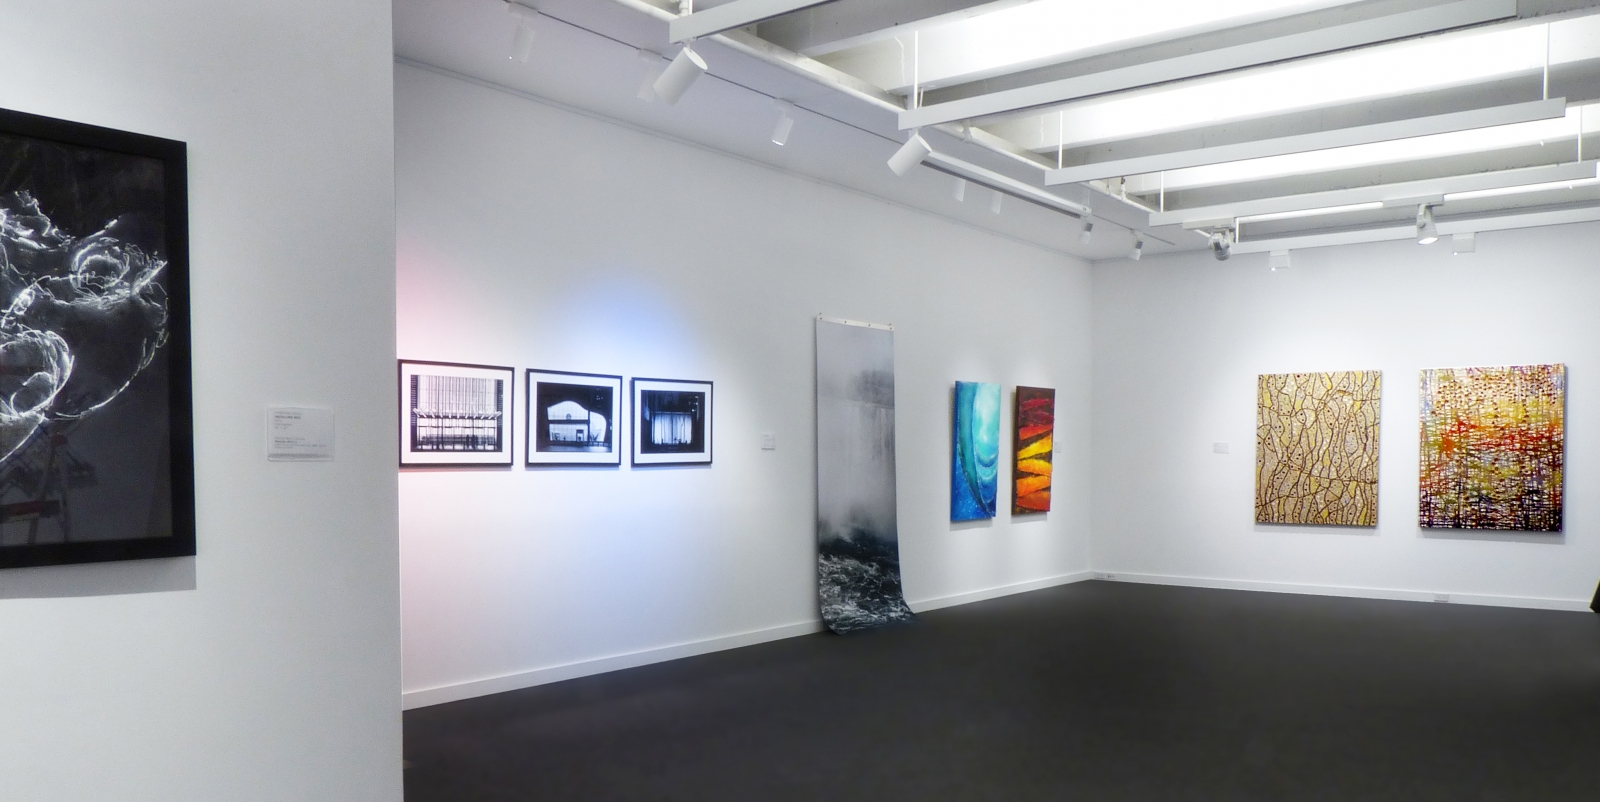 Art Galleries and Lighting: Why It’s So Important to Position Lights Right